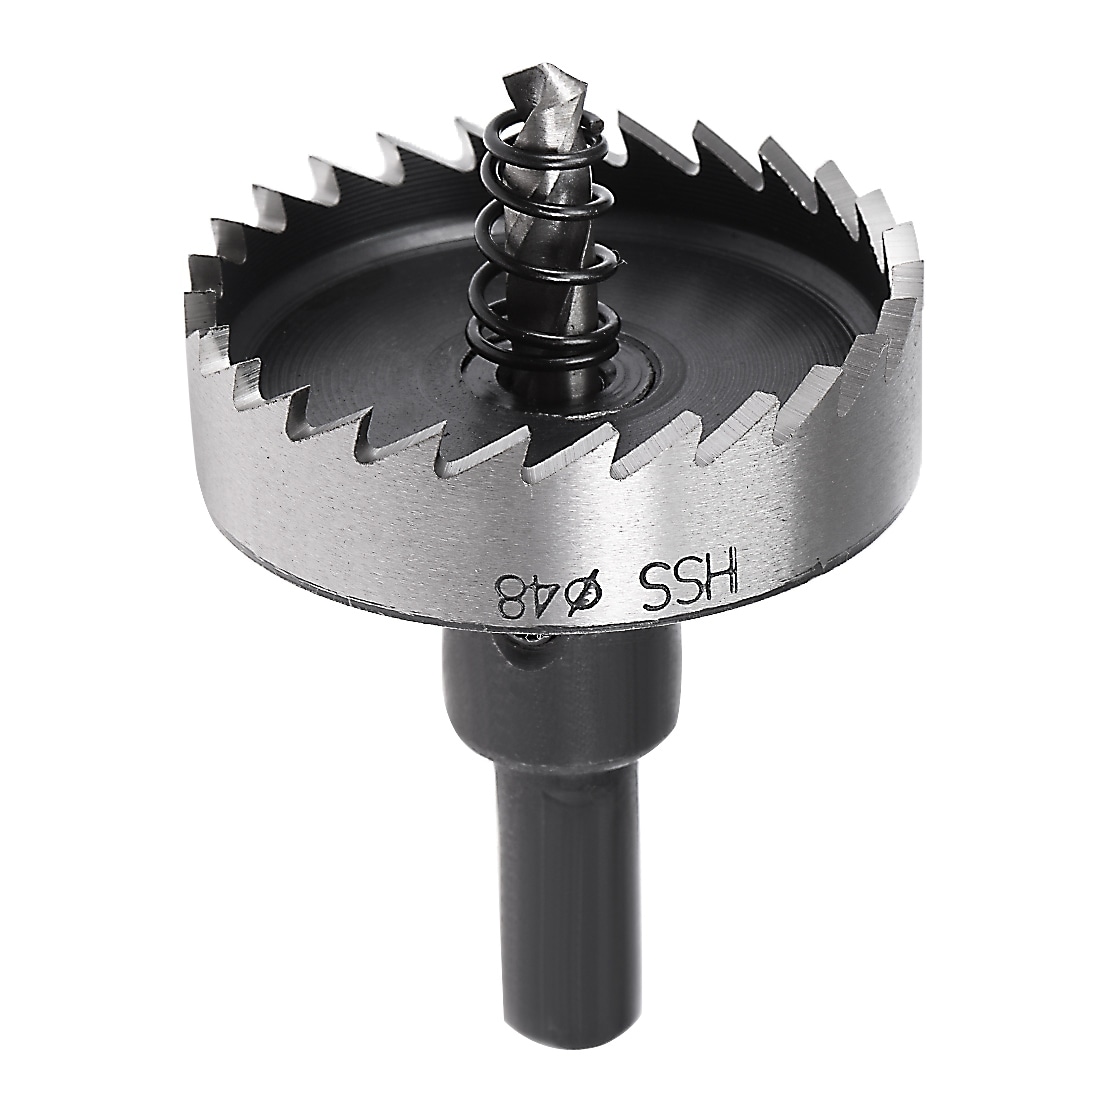 Details about   12mm-200mm TCT Metal Hole Saw Cutter Drill Bit For Iron Aluminum Stainless Steel 